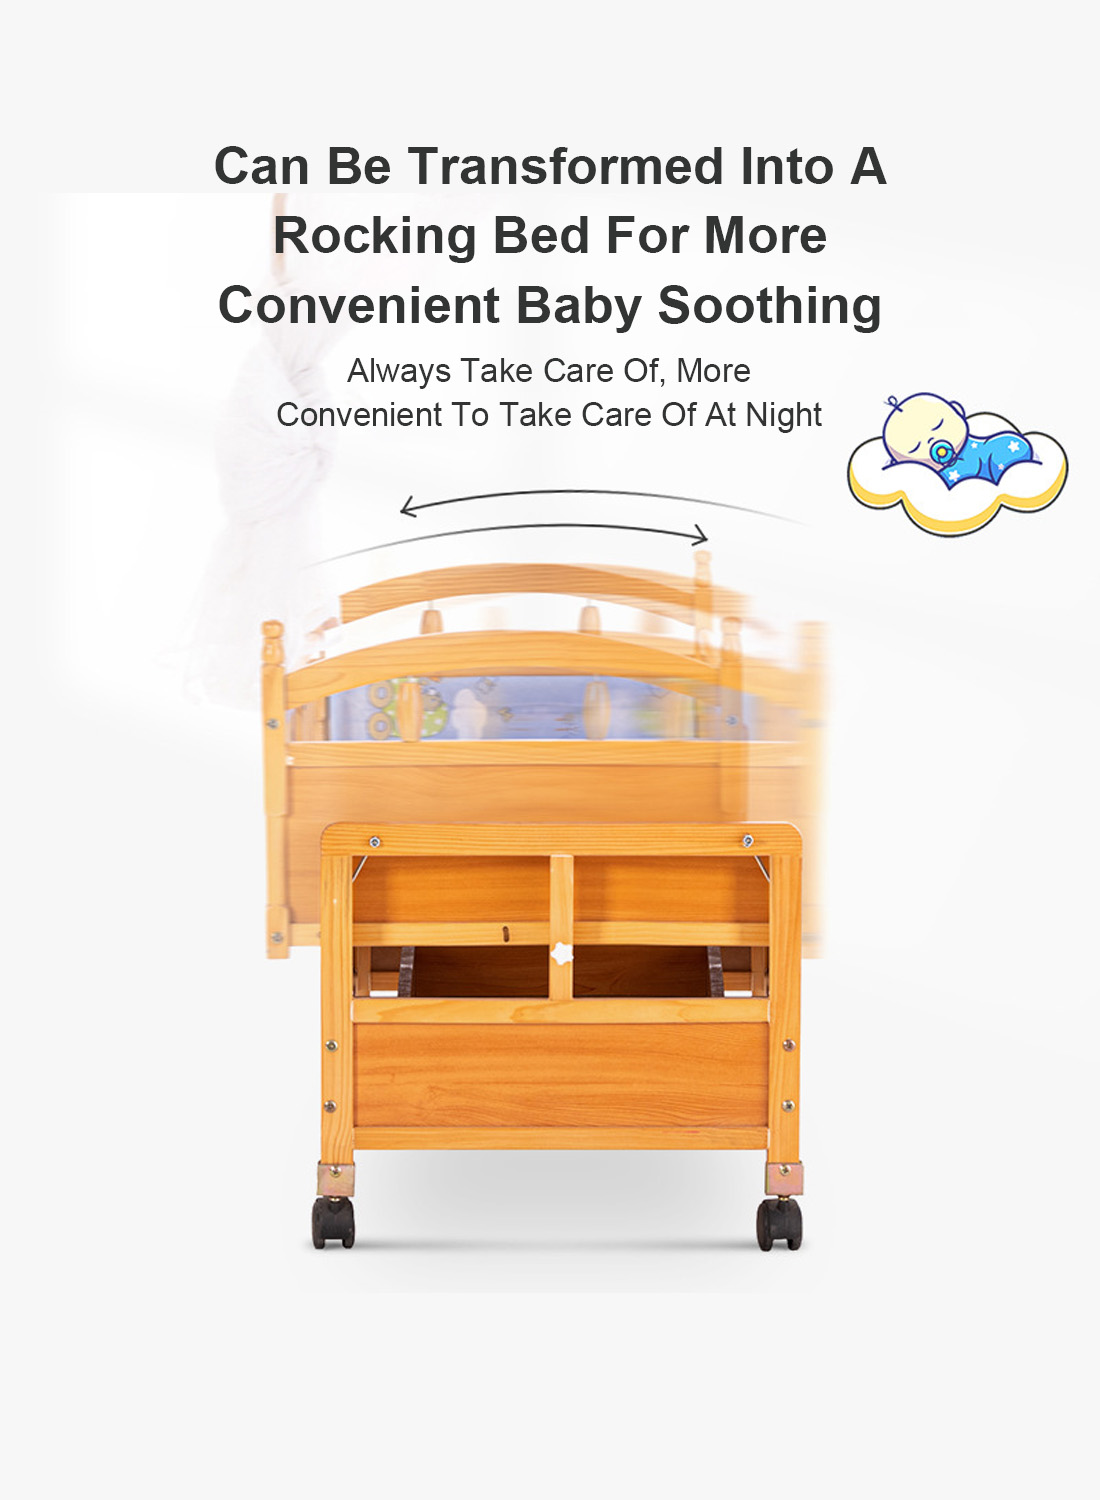 Undertake Large Shipments of Baby Cribs Solid Wood Unpainted Multifunctional Cradle Can Be Spliced Newborn Baby Beds Chinese Manufacturers Baby Beds